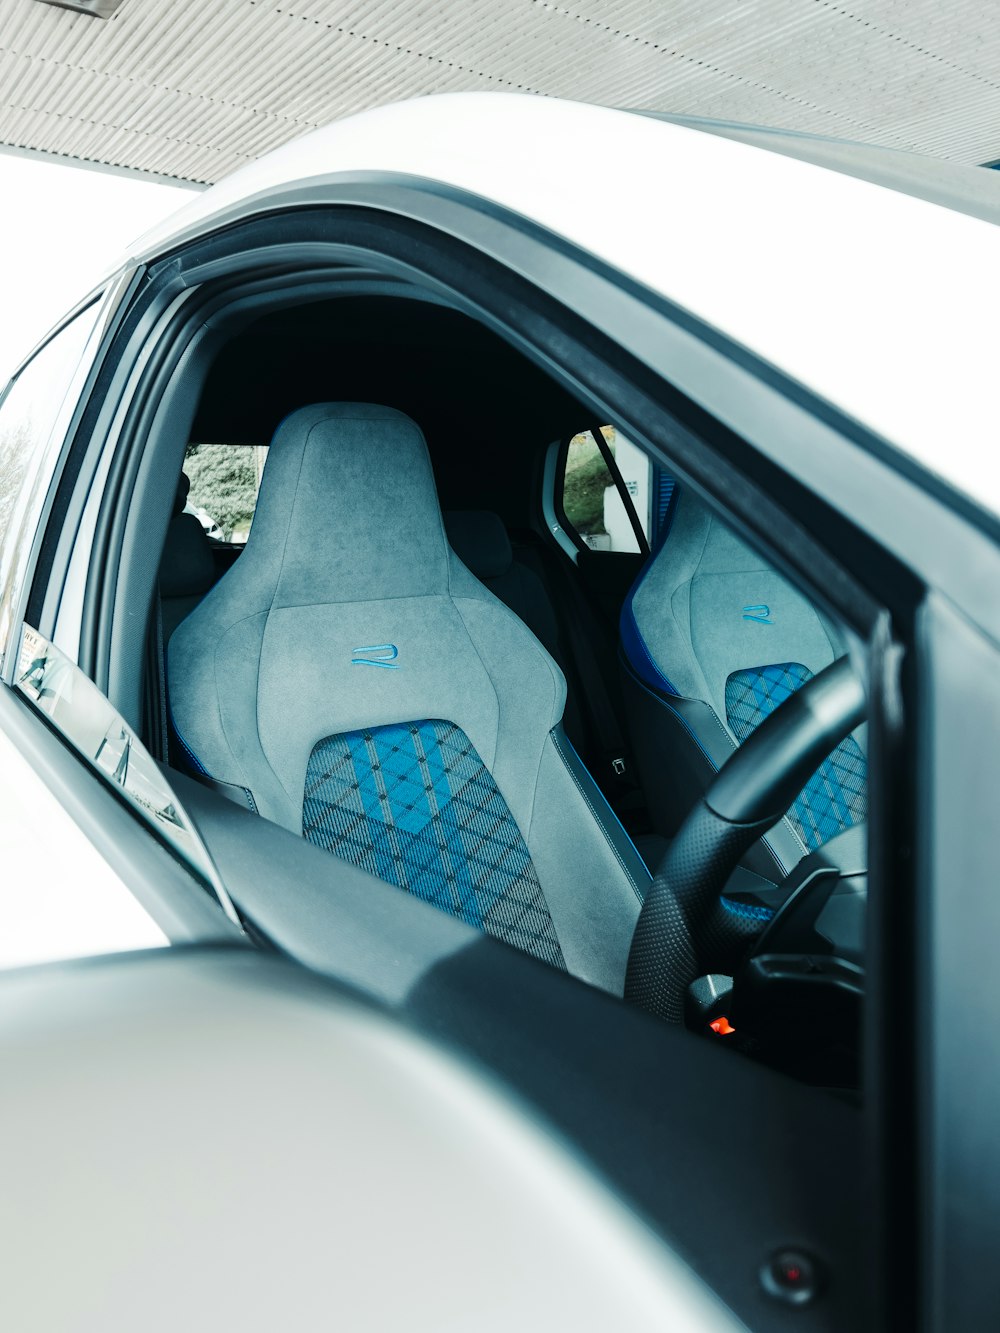 the interior of a car with blue seats